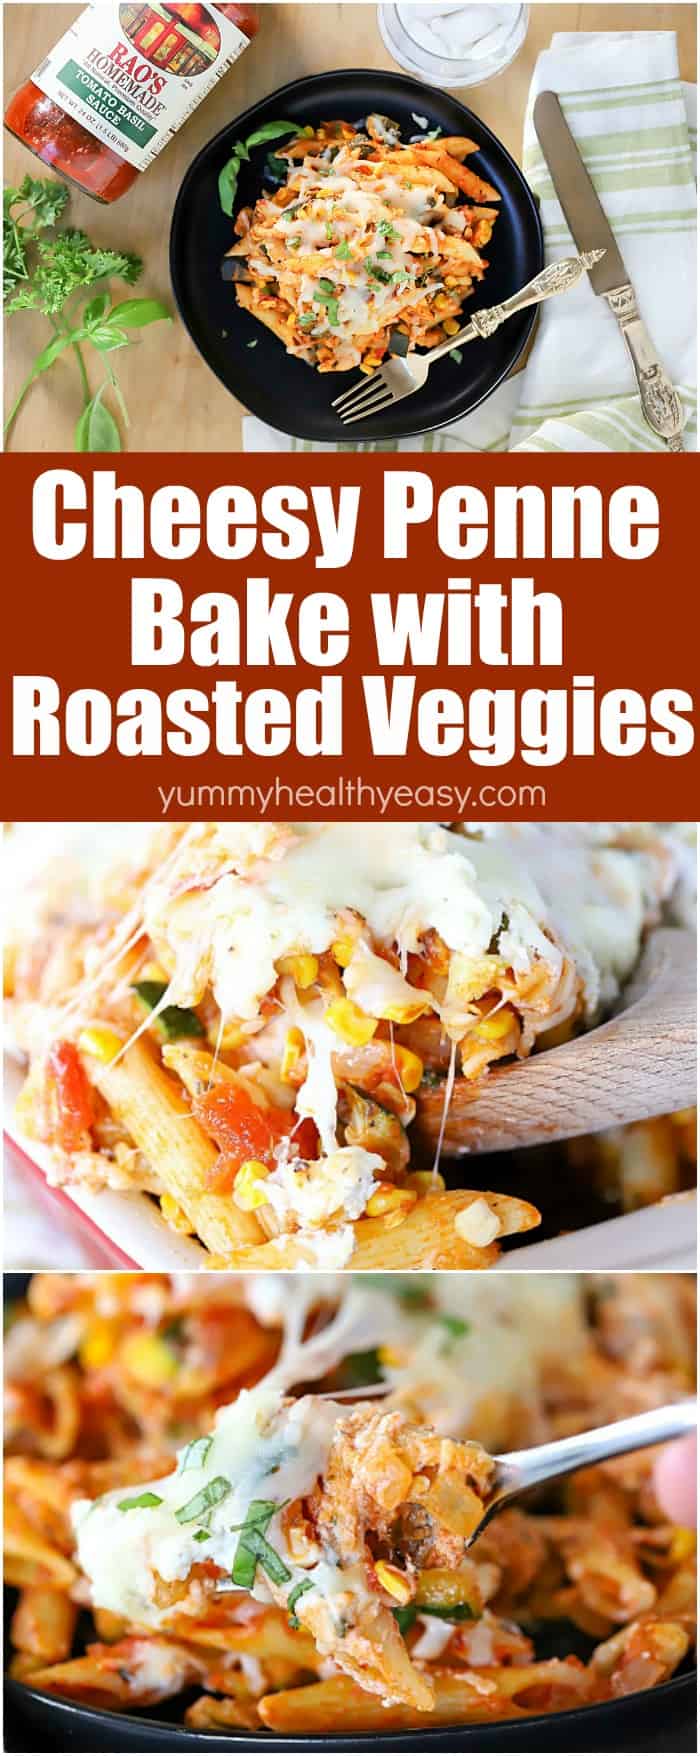 You will LOVE this Cheesy Penne Pasta Bake with Roasted Summer Vegetables! It’s a light pasta casserole filled with roasted summer vegetables, penne pasta, Rao’s Homemade pasta sauce, layers of a delicious ricotta cheese mixture and topped with mozzarella. It’s the perfect light summer pasta dinner! #ad @raoshomemade #DeliciousSpeaksforItself #dinner #pasta #recipe #summer #Raos #homemade #raossauce #recipes #italianfood #homemadefood #easyrecipes #sauce #tomatosauce via @jennikolaus